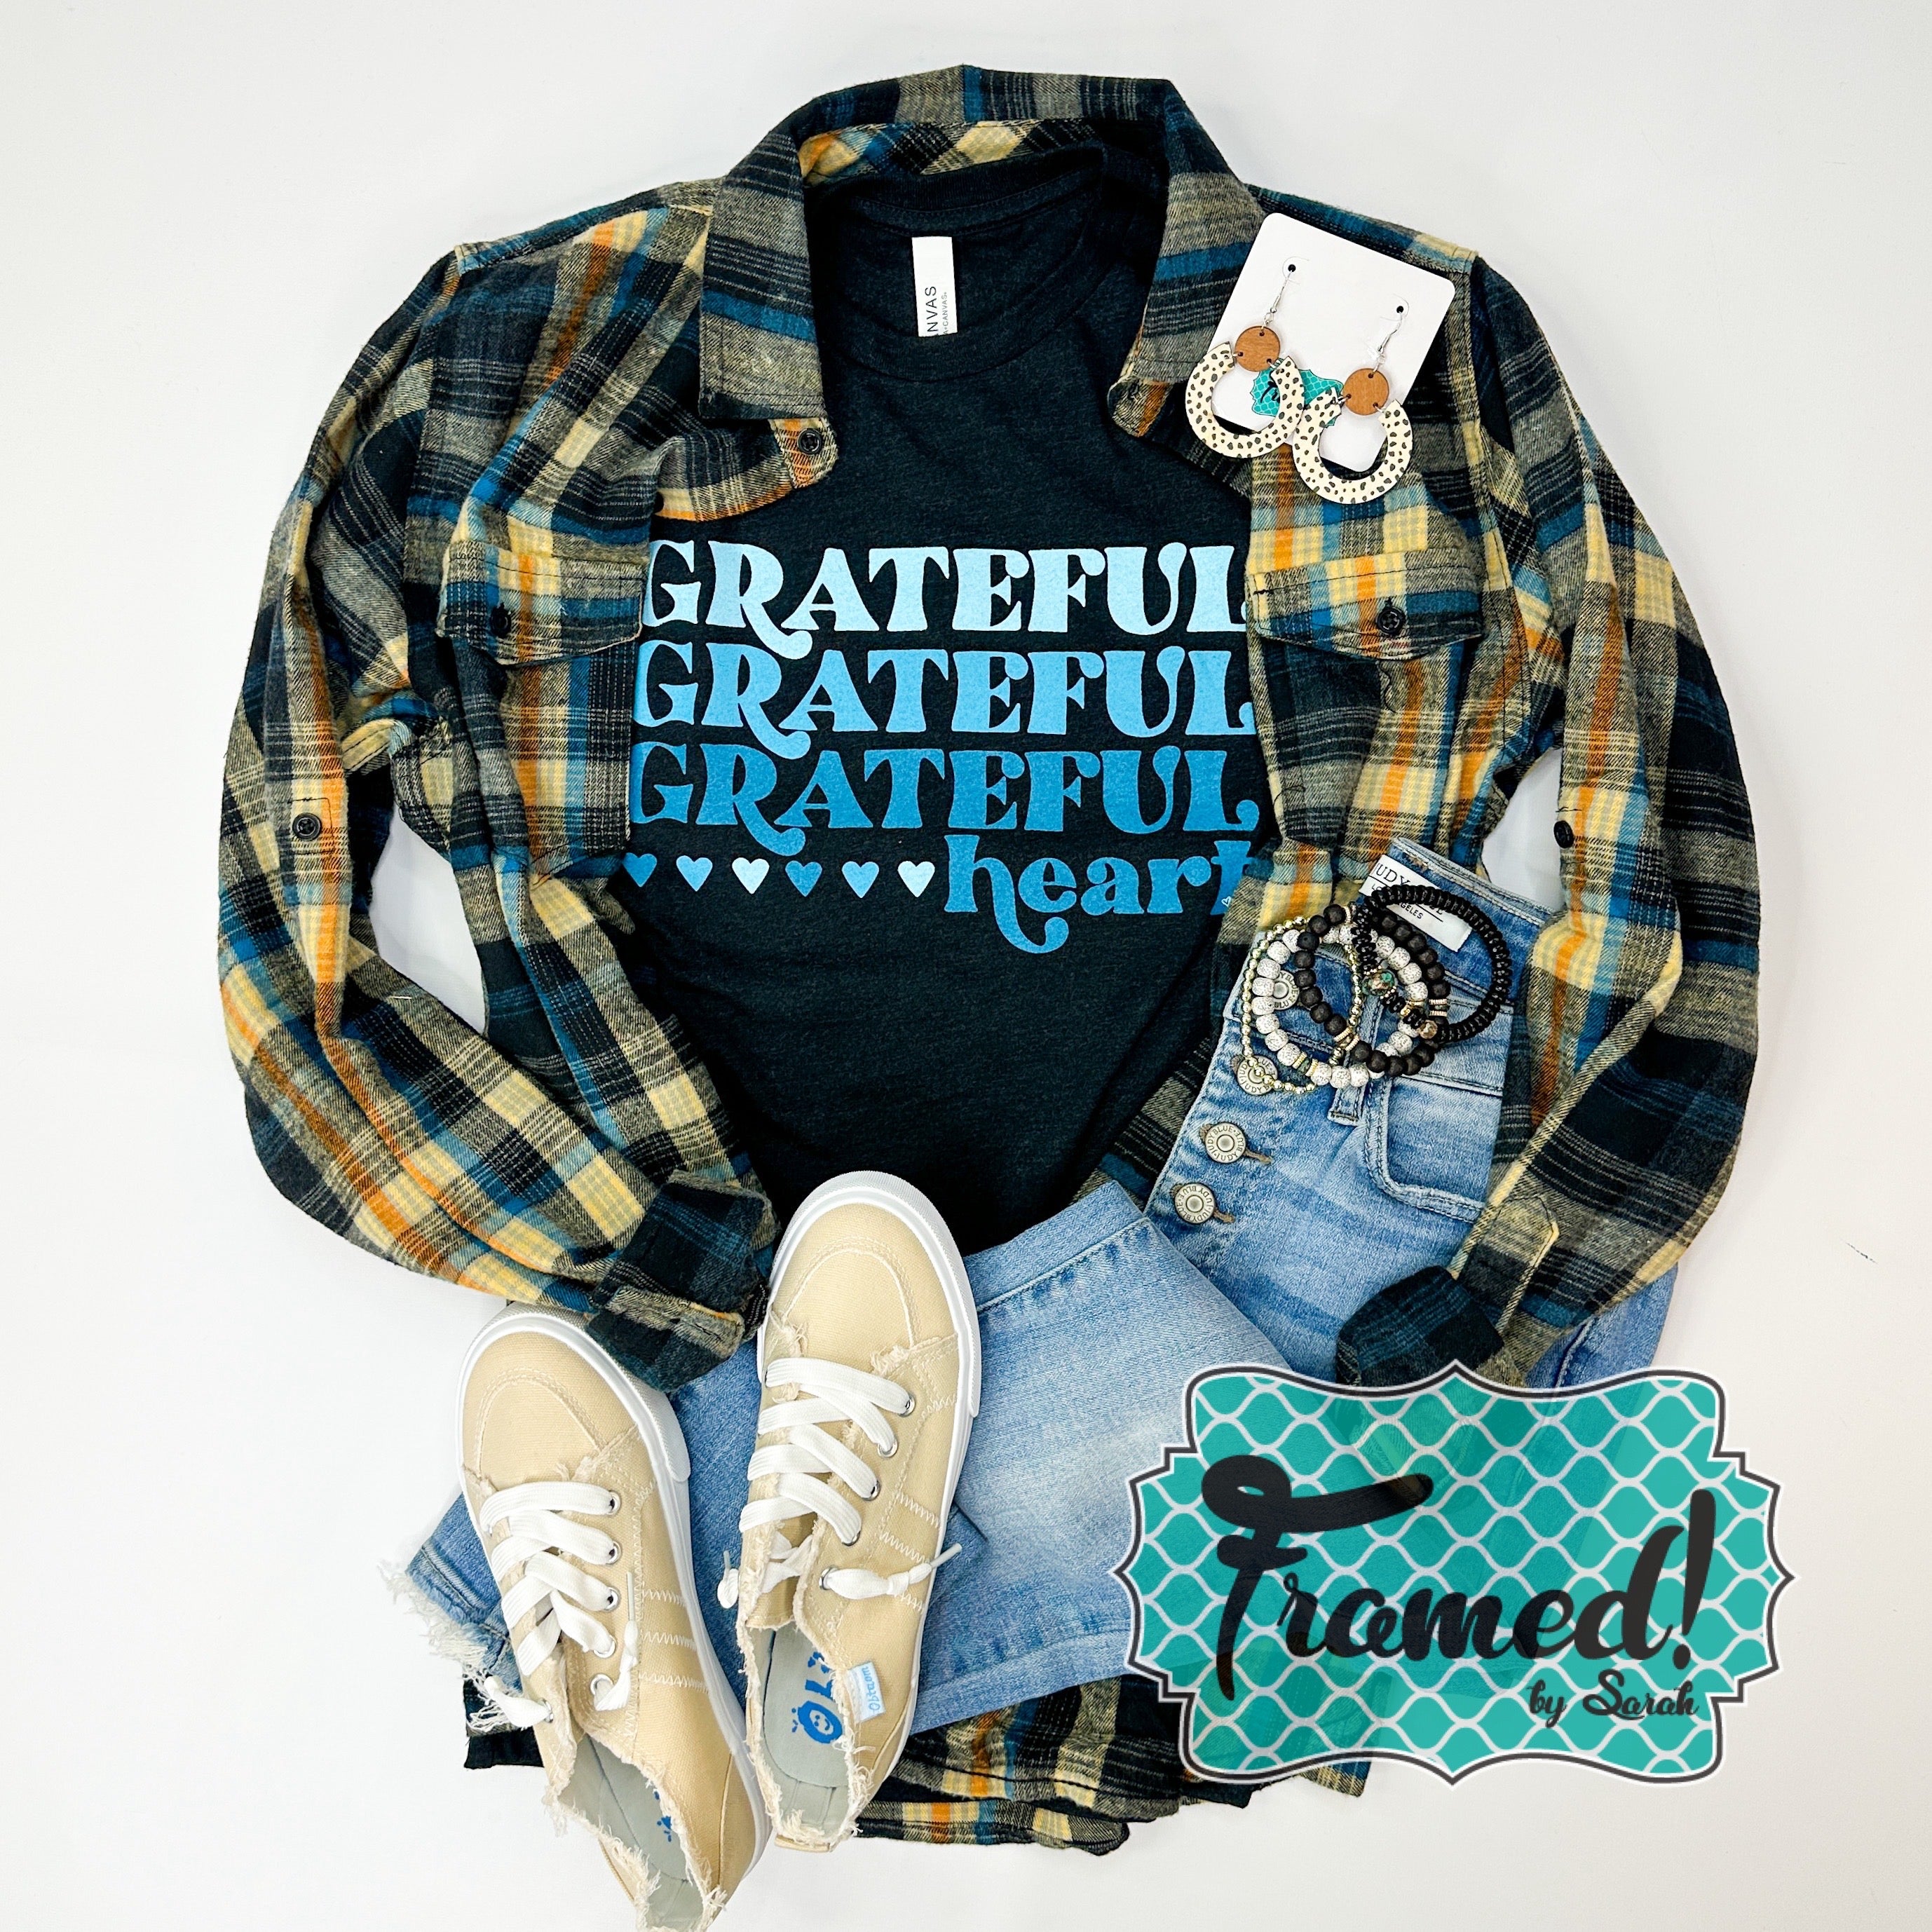 Grateful Heart Graphic Tee (M, L & XL only)